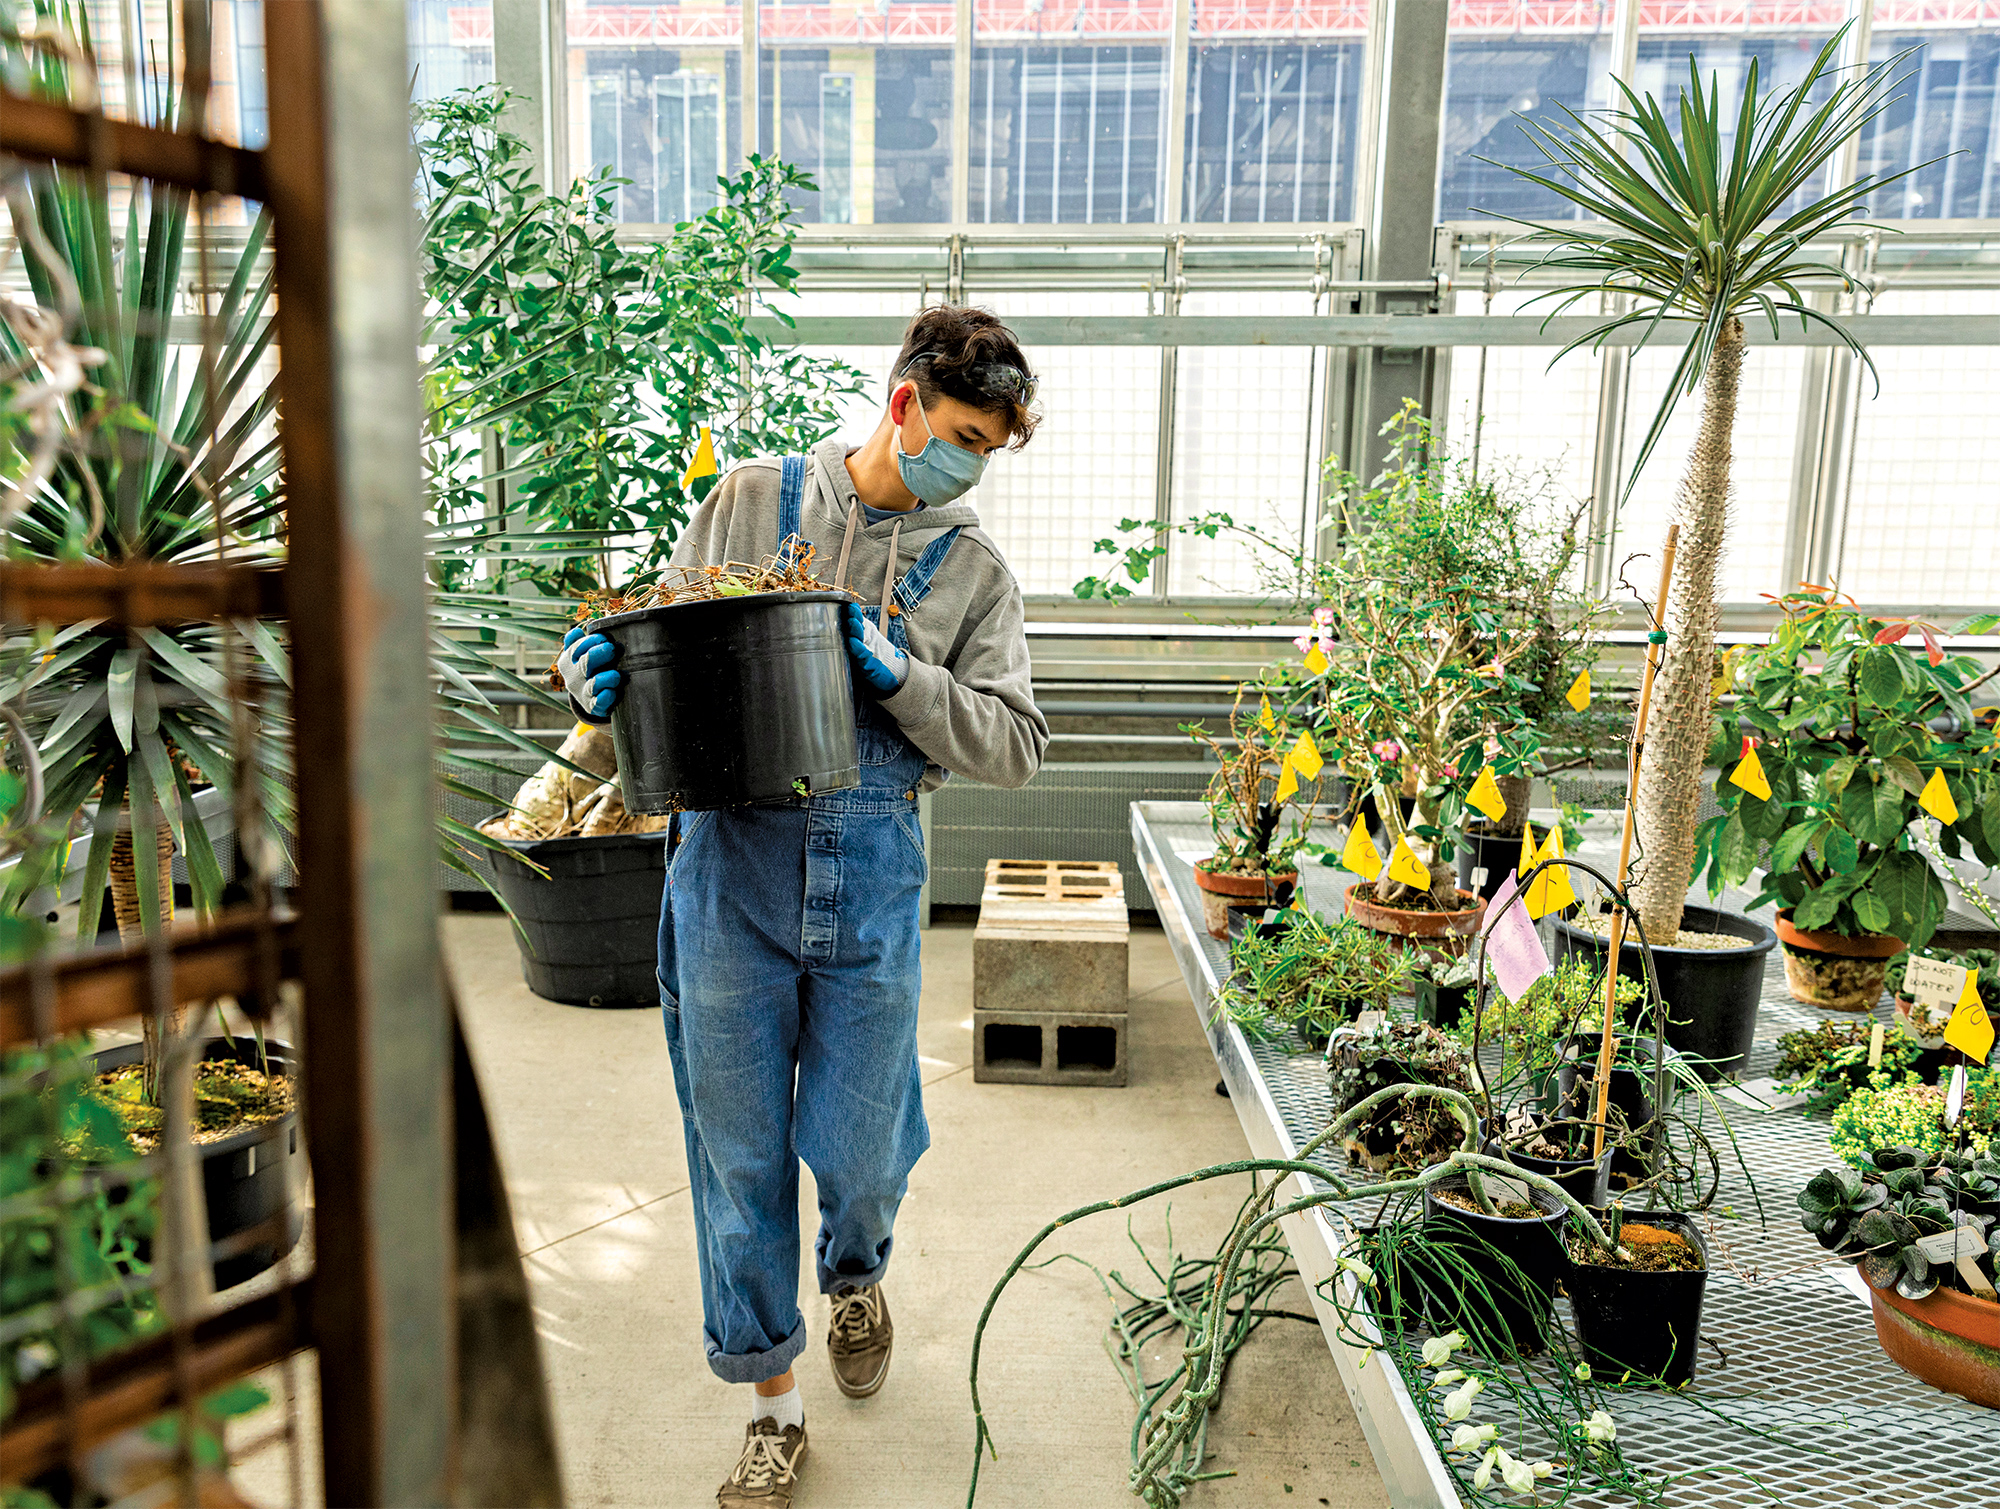 A biology student wearing denim overalls and a cloth mask carries a large pot through a greenhouse.